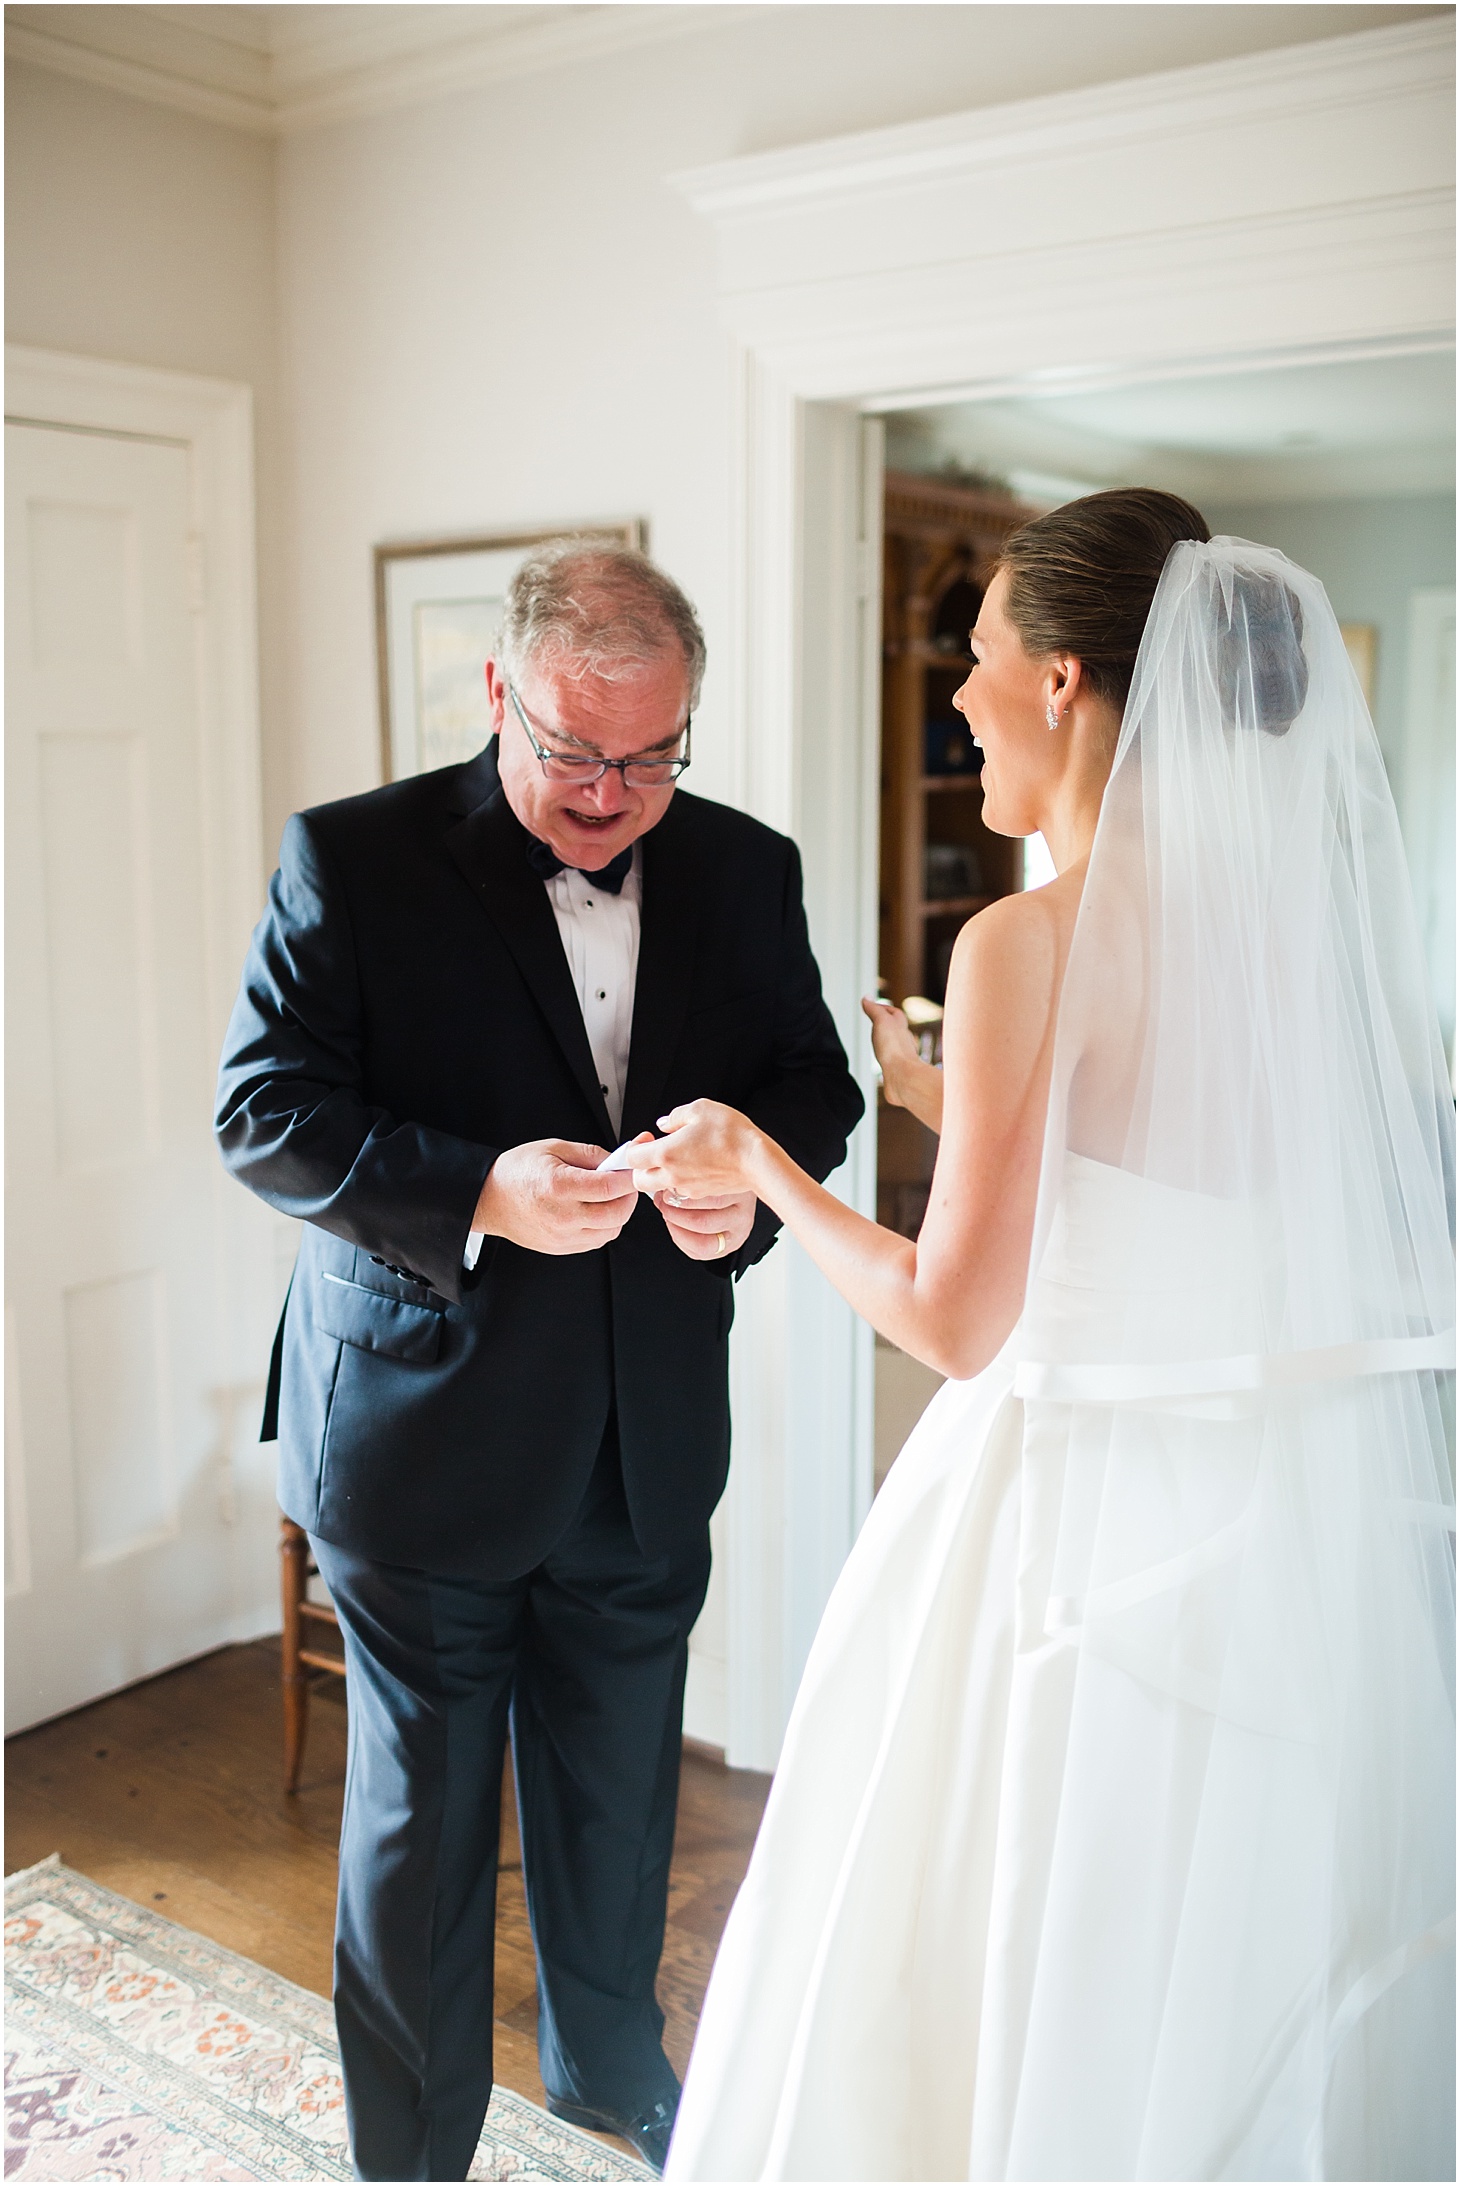 Father-Daughter First Look | Summer Rooftop Wedding at The Capitol View at 400 | Sarah Bradshaw Photography | Washington DC Wedding Photographer